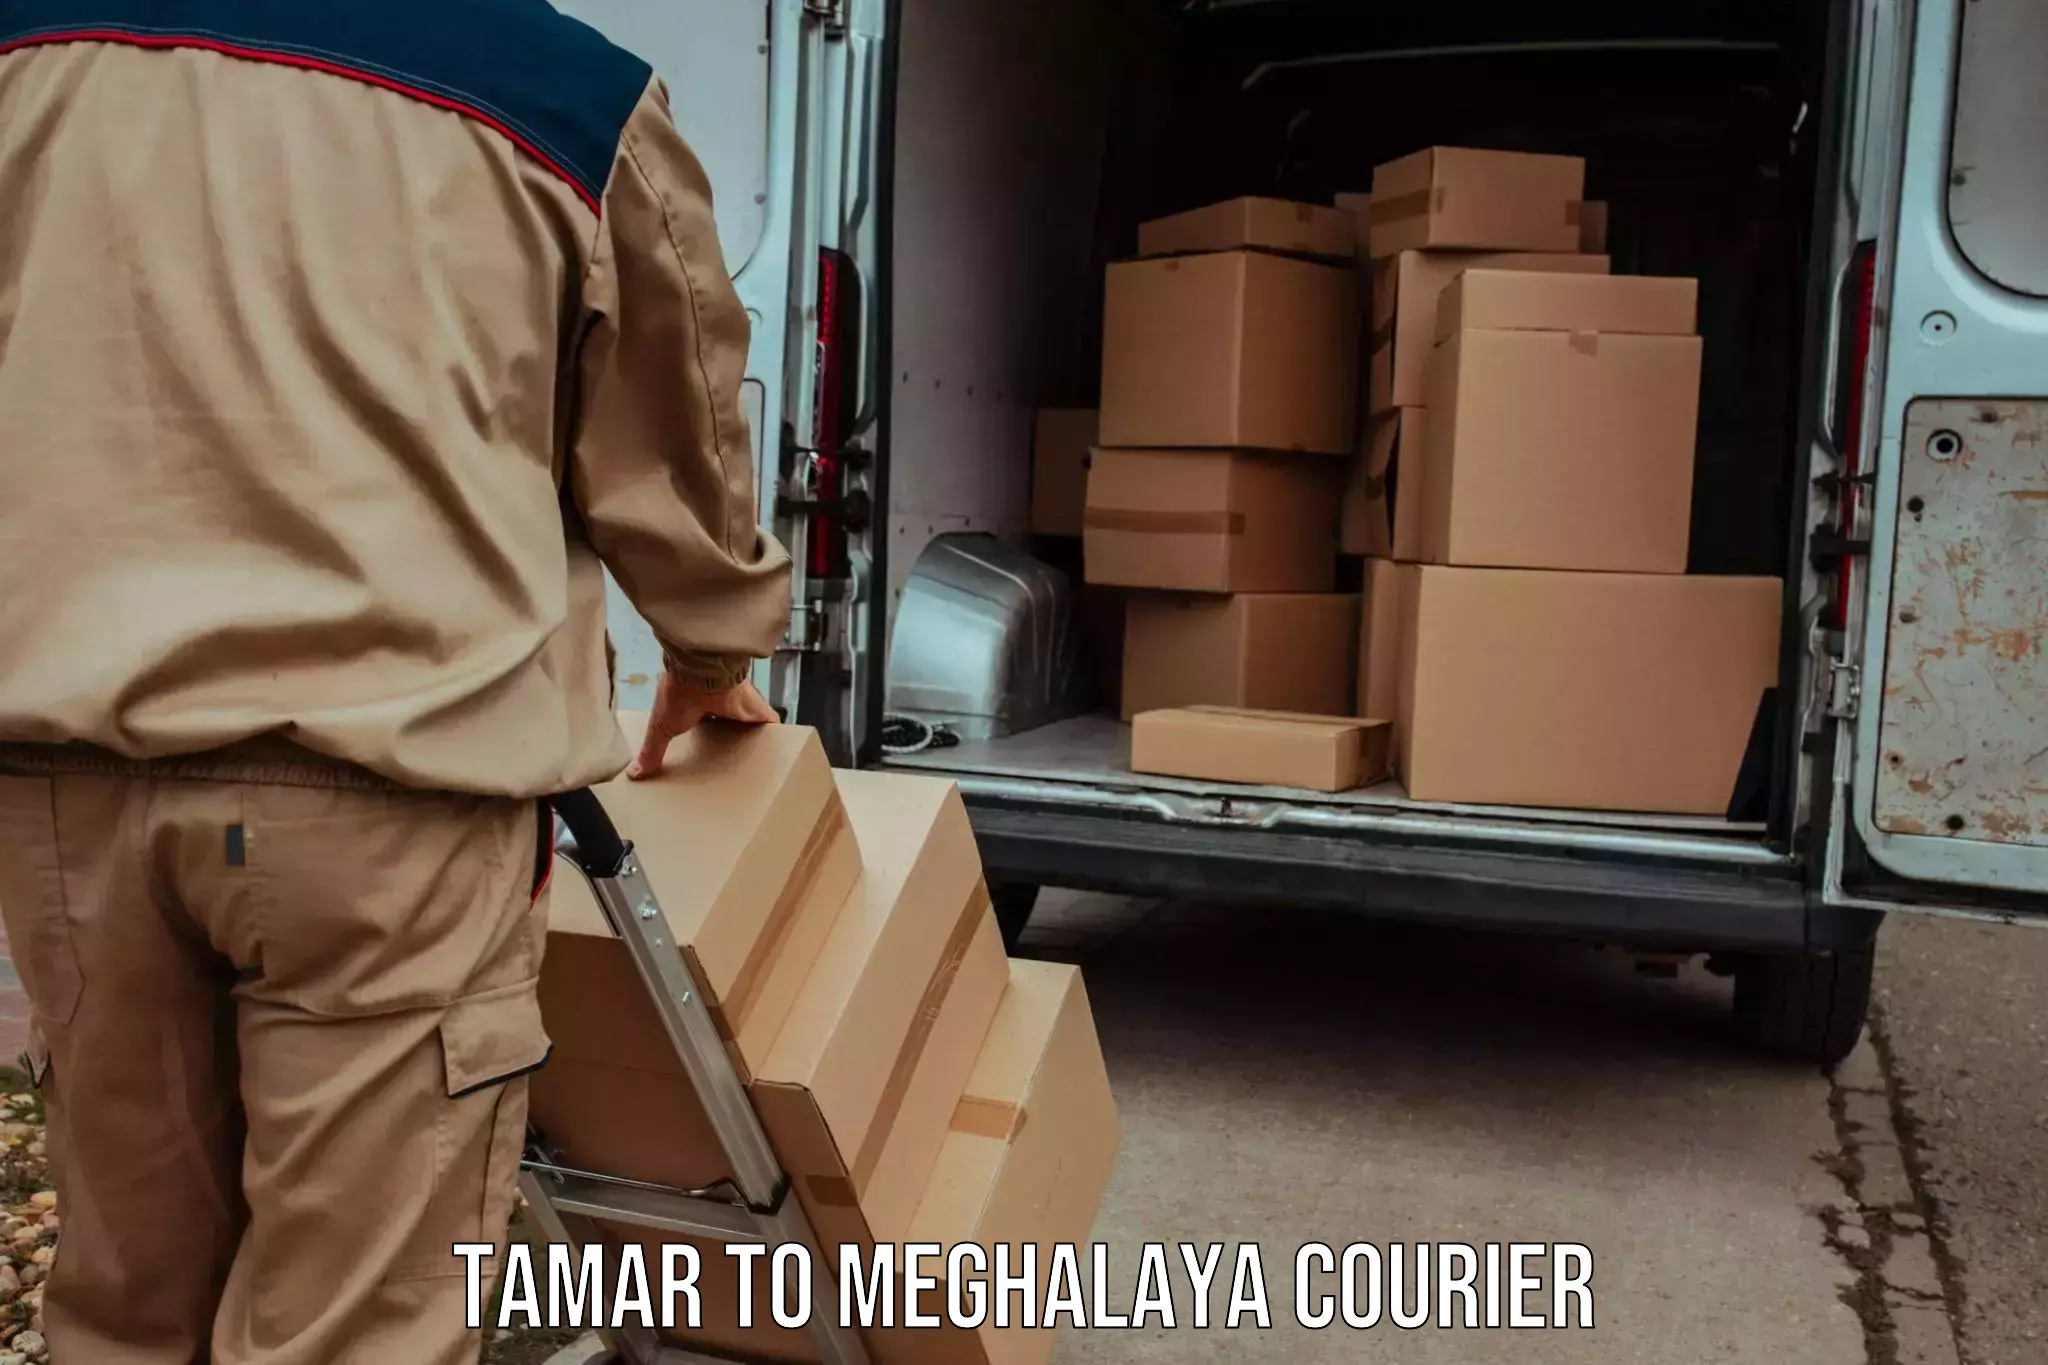 Subscription-based courier Tamar to Meghalaya